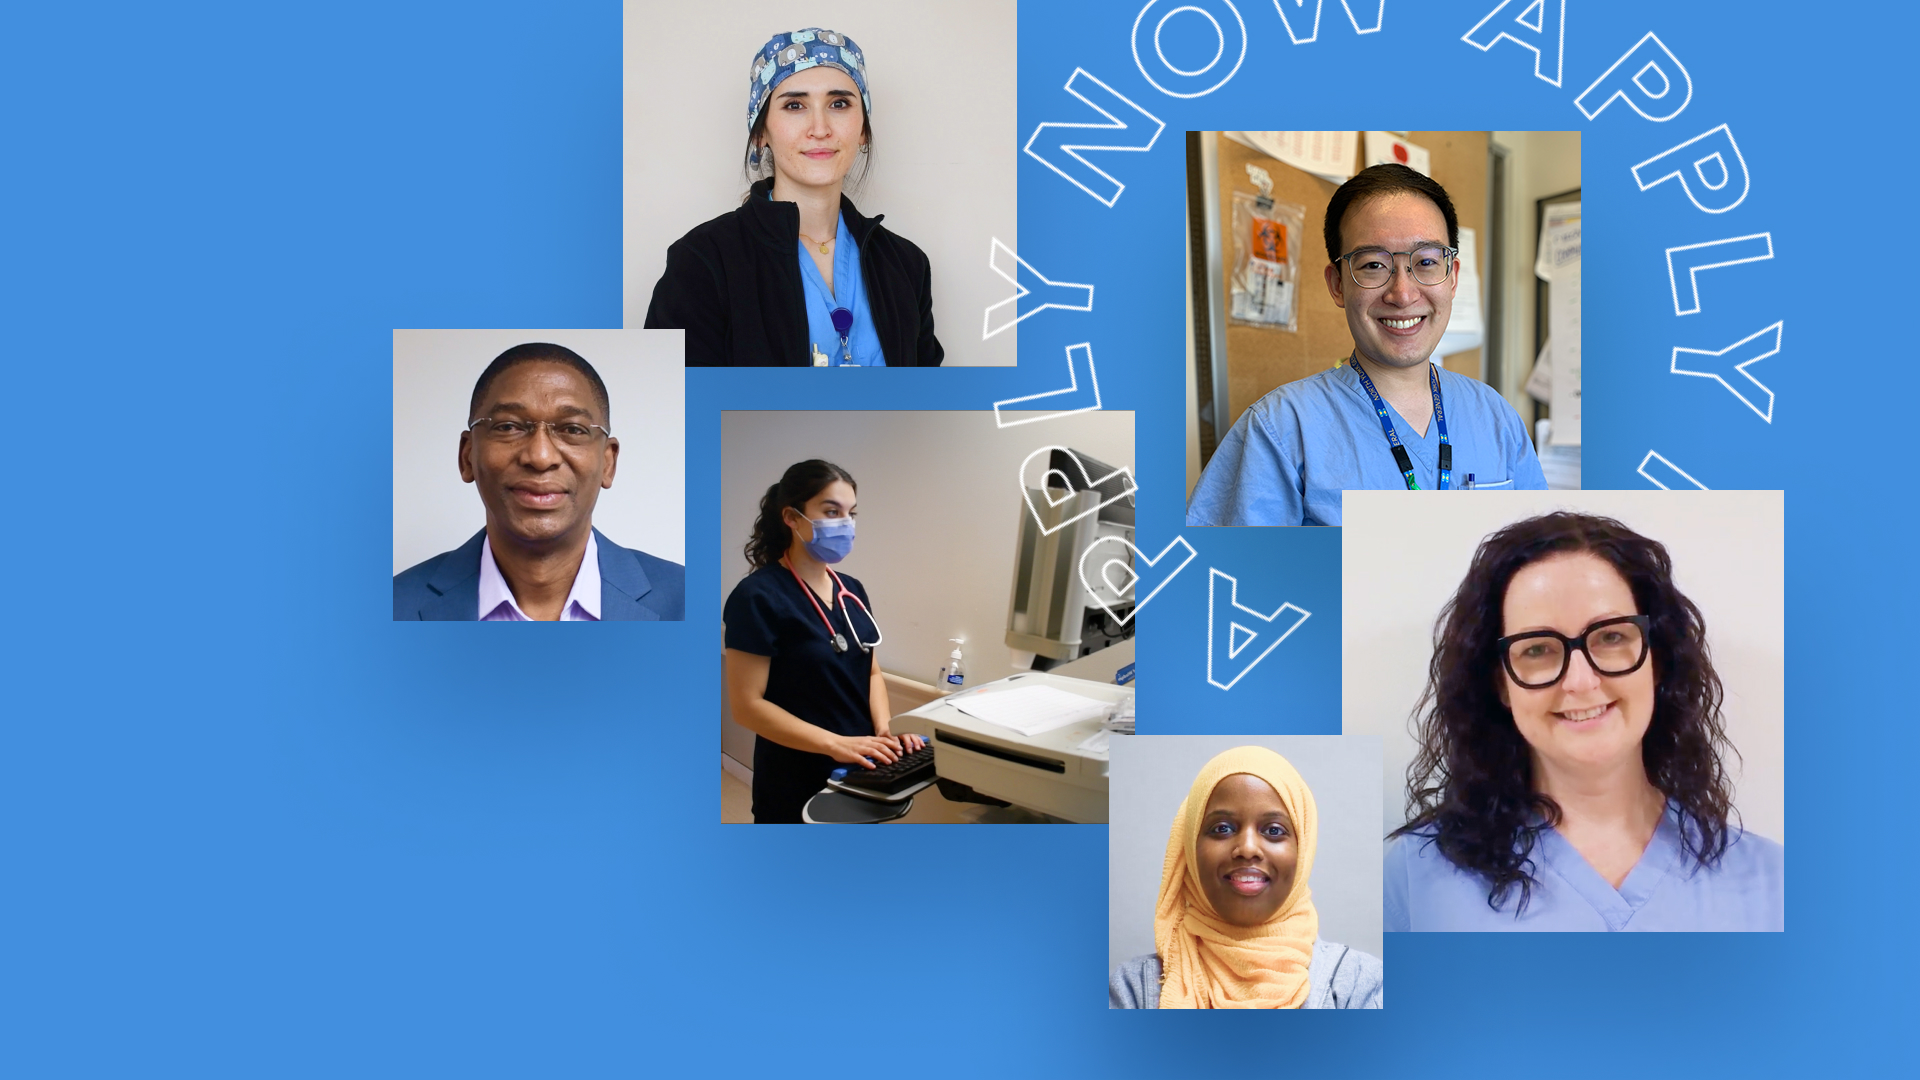 A collage image of 6 health care workers on a blue background. The text reads Apply Now.